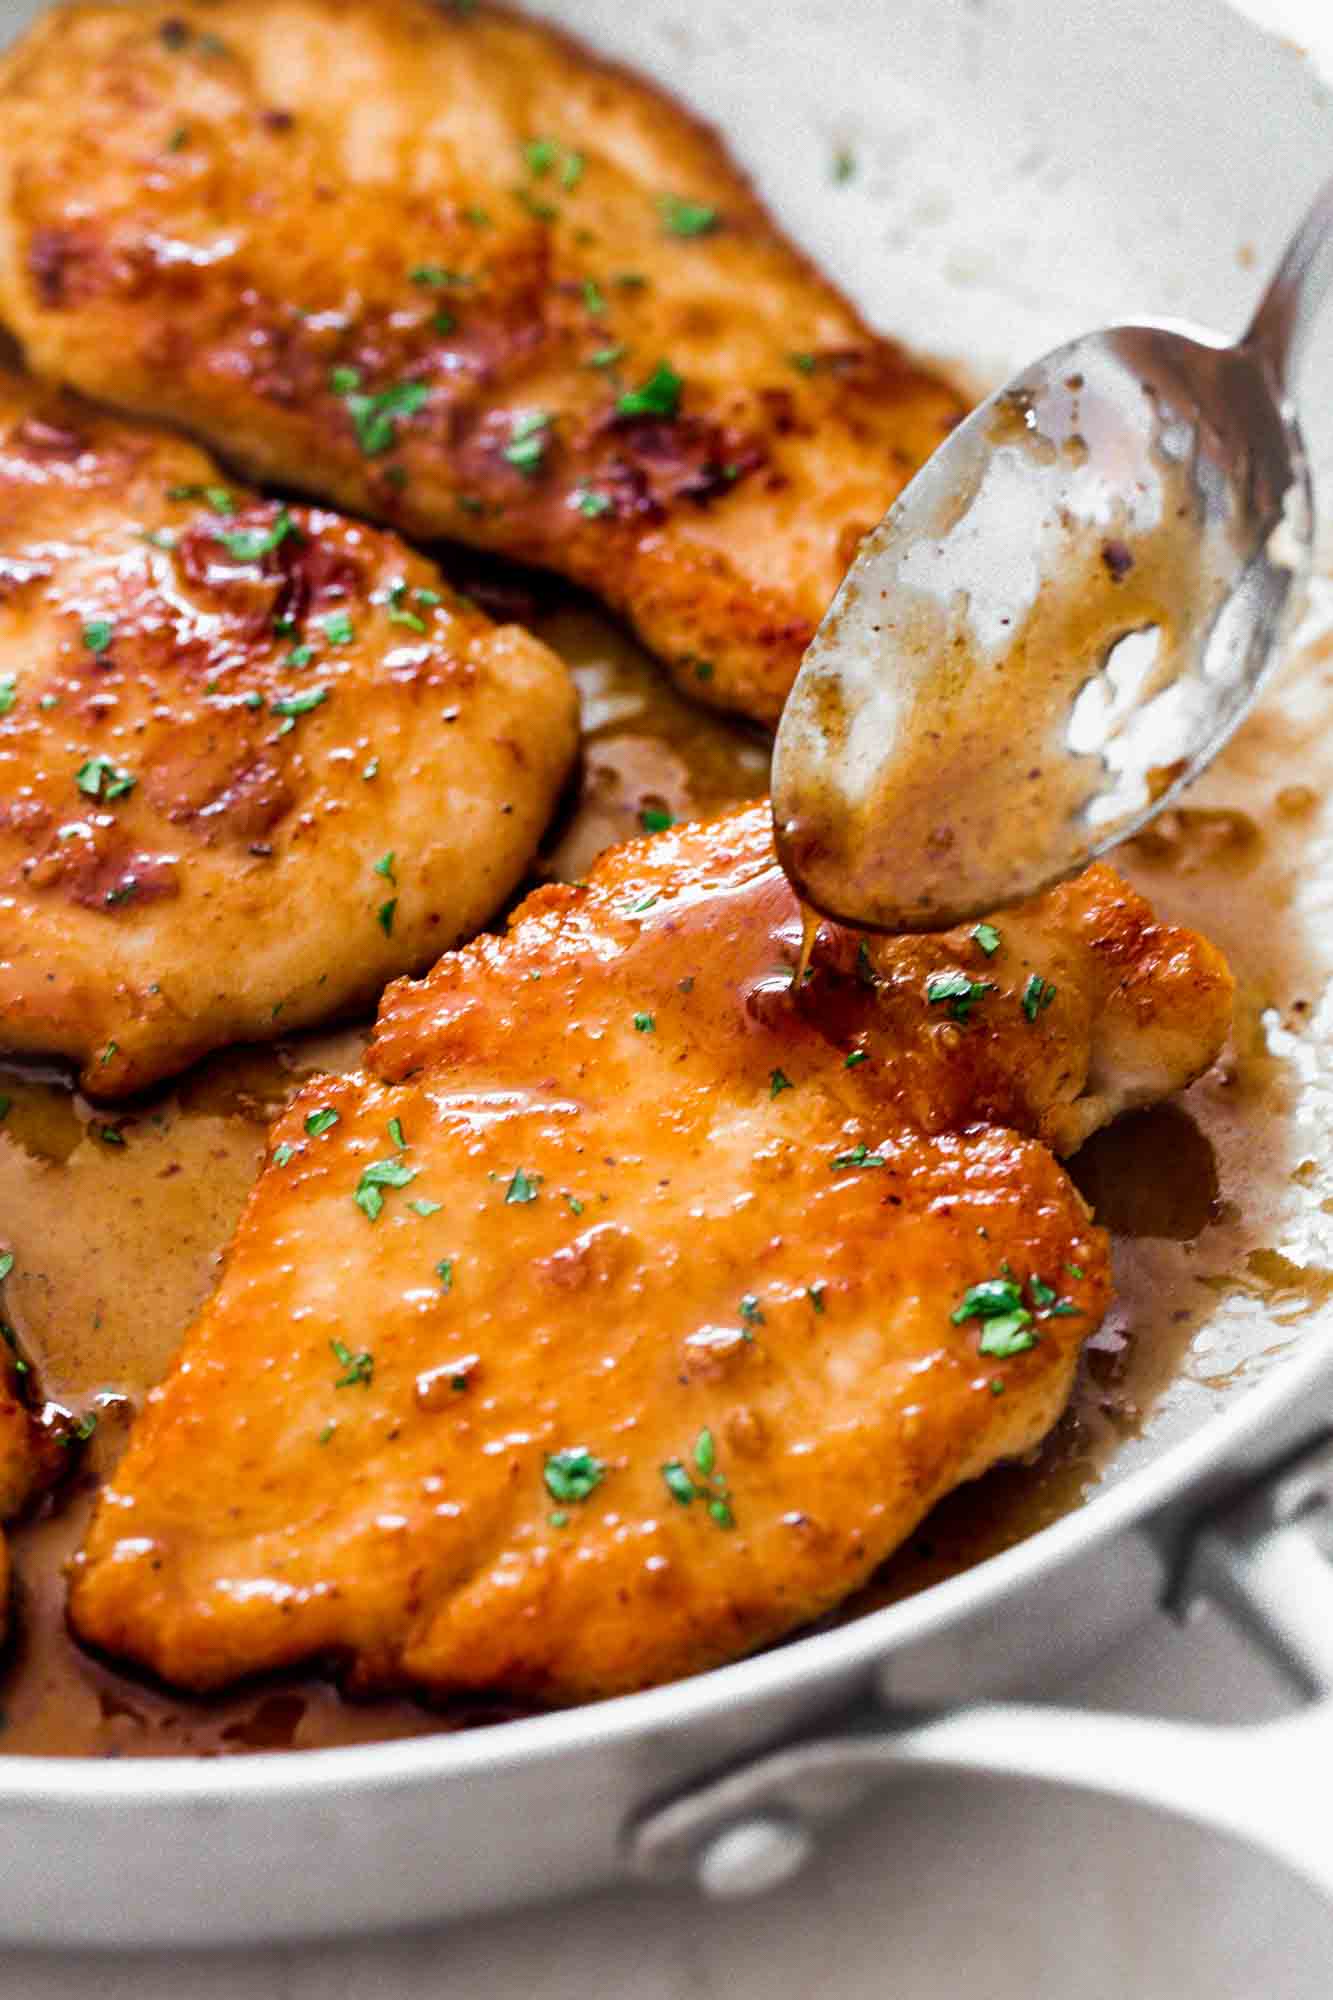 Spooning sauce over the honey garlic chicken cutlets in a pan